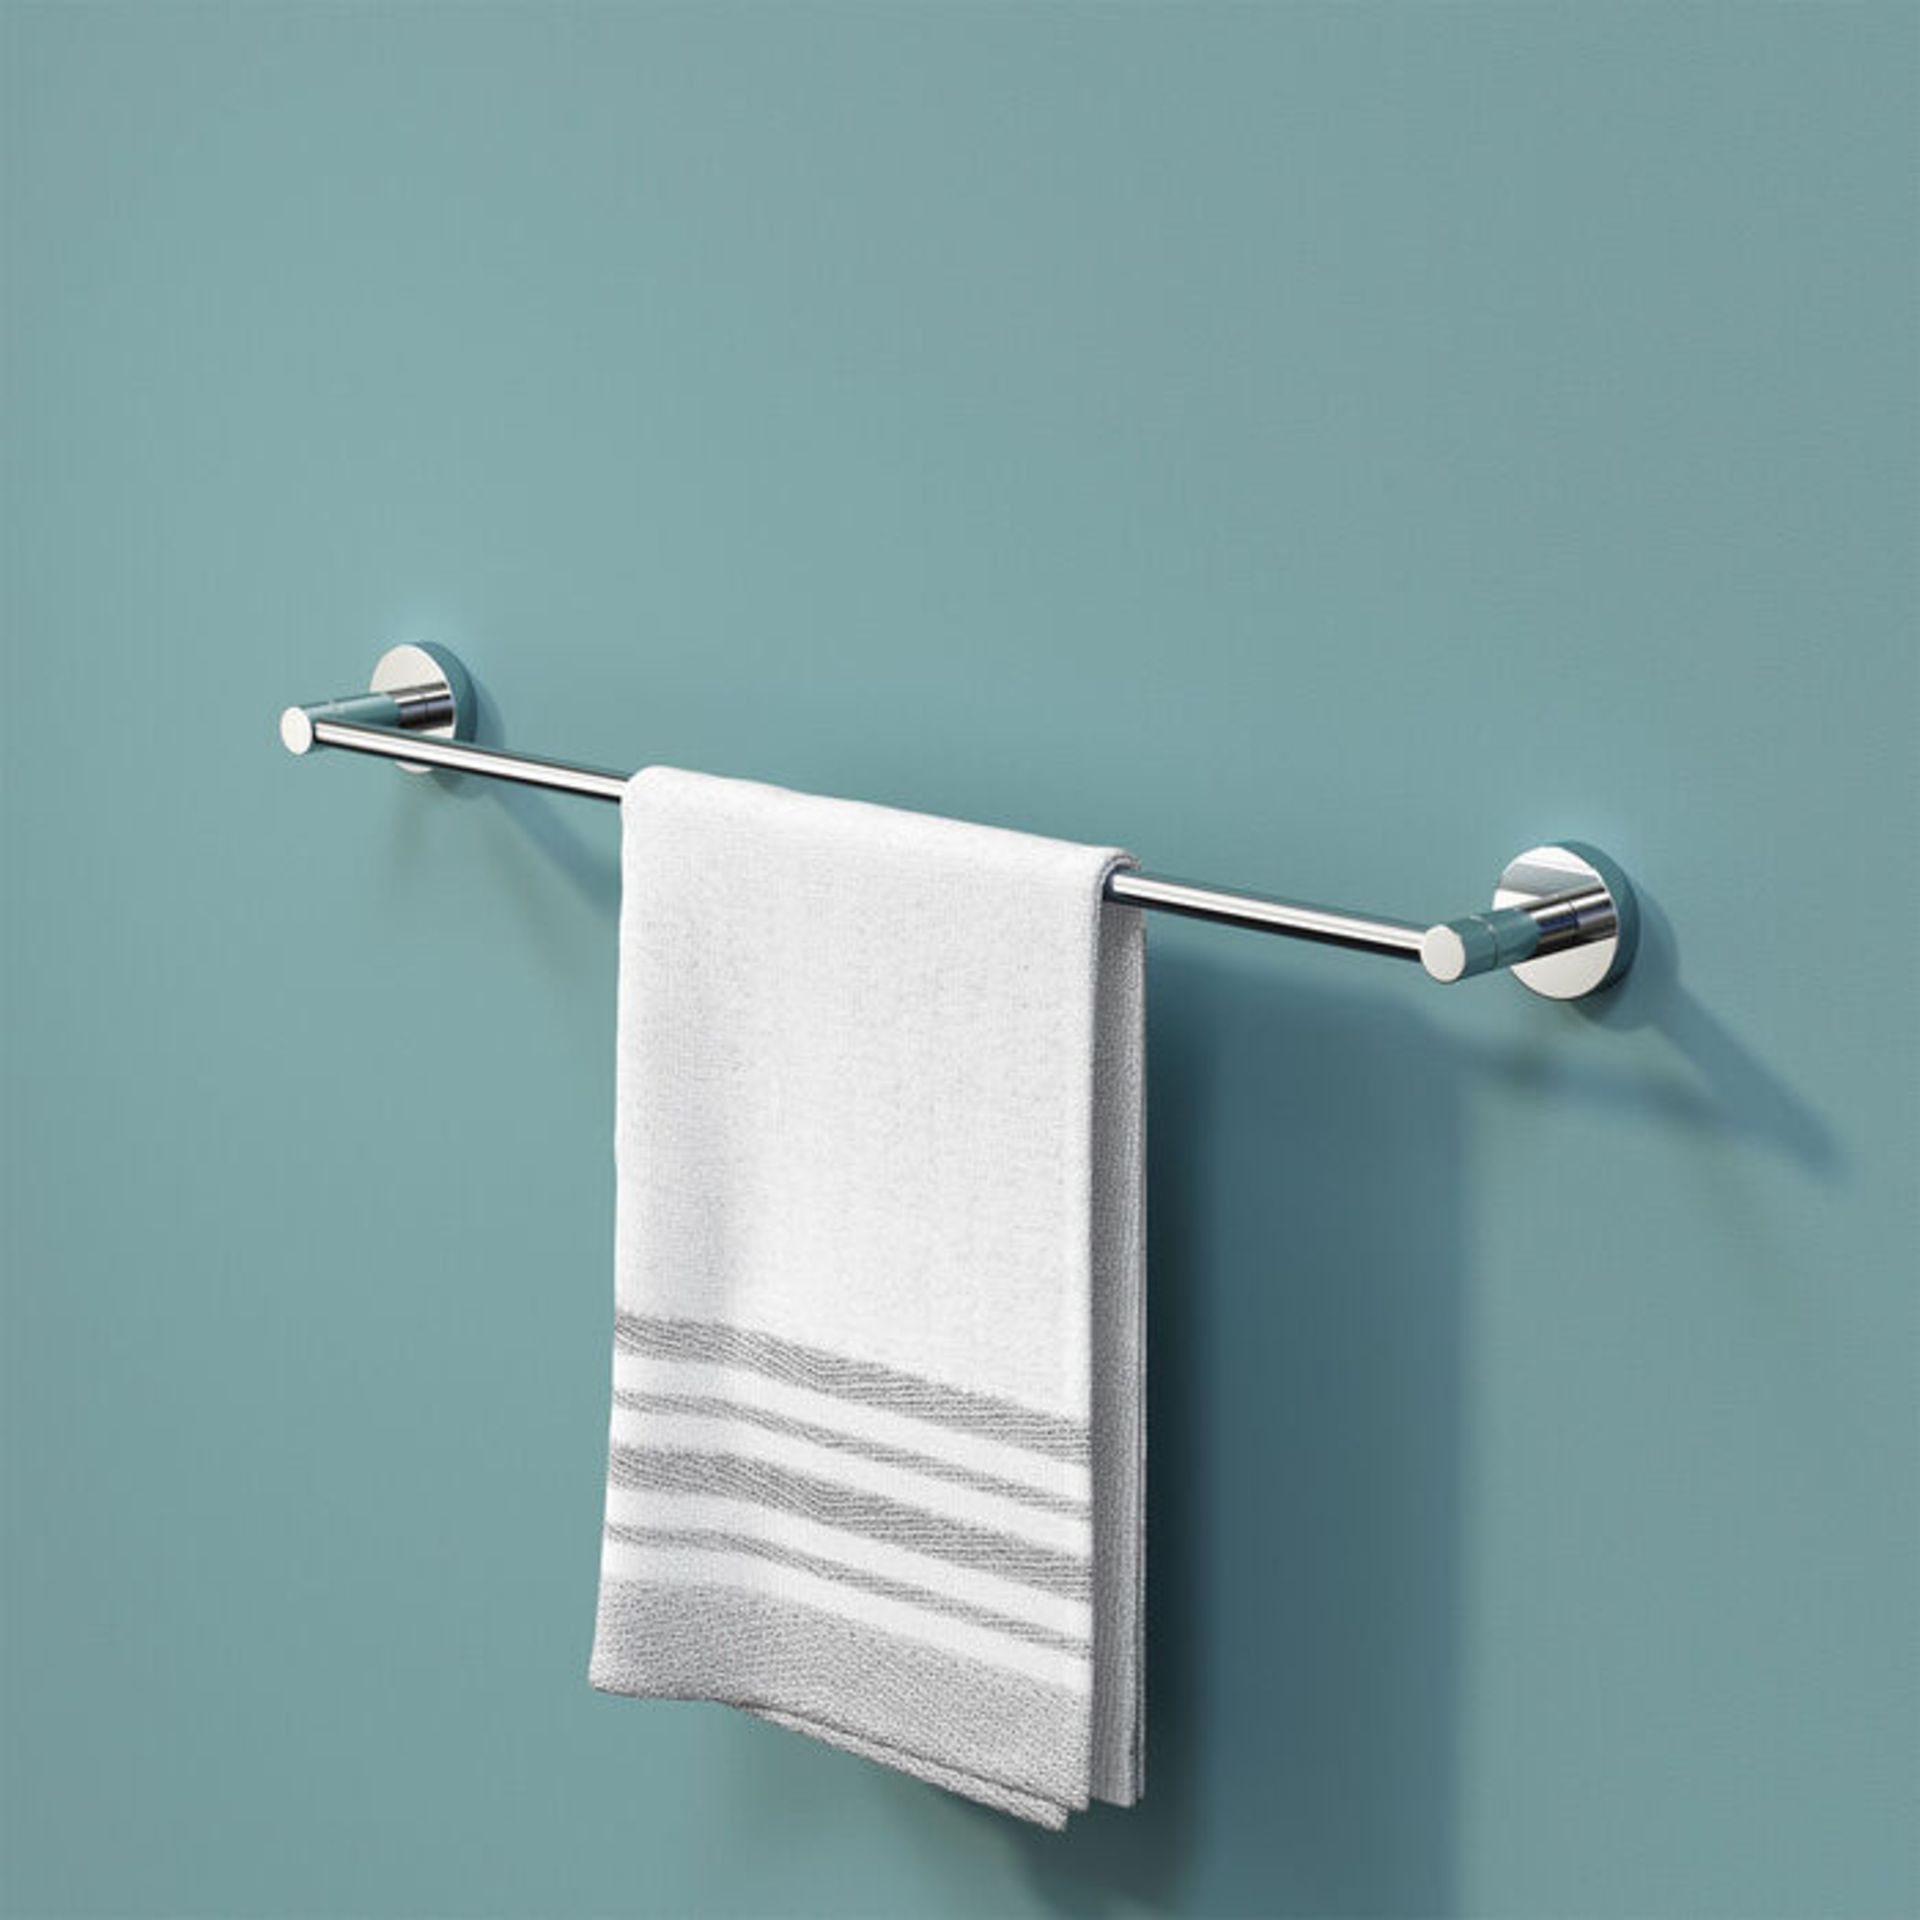 (SU1011) Finsbury Towel Rail. Designed to conceal all fittings Completes your bathroom with a ...